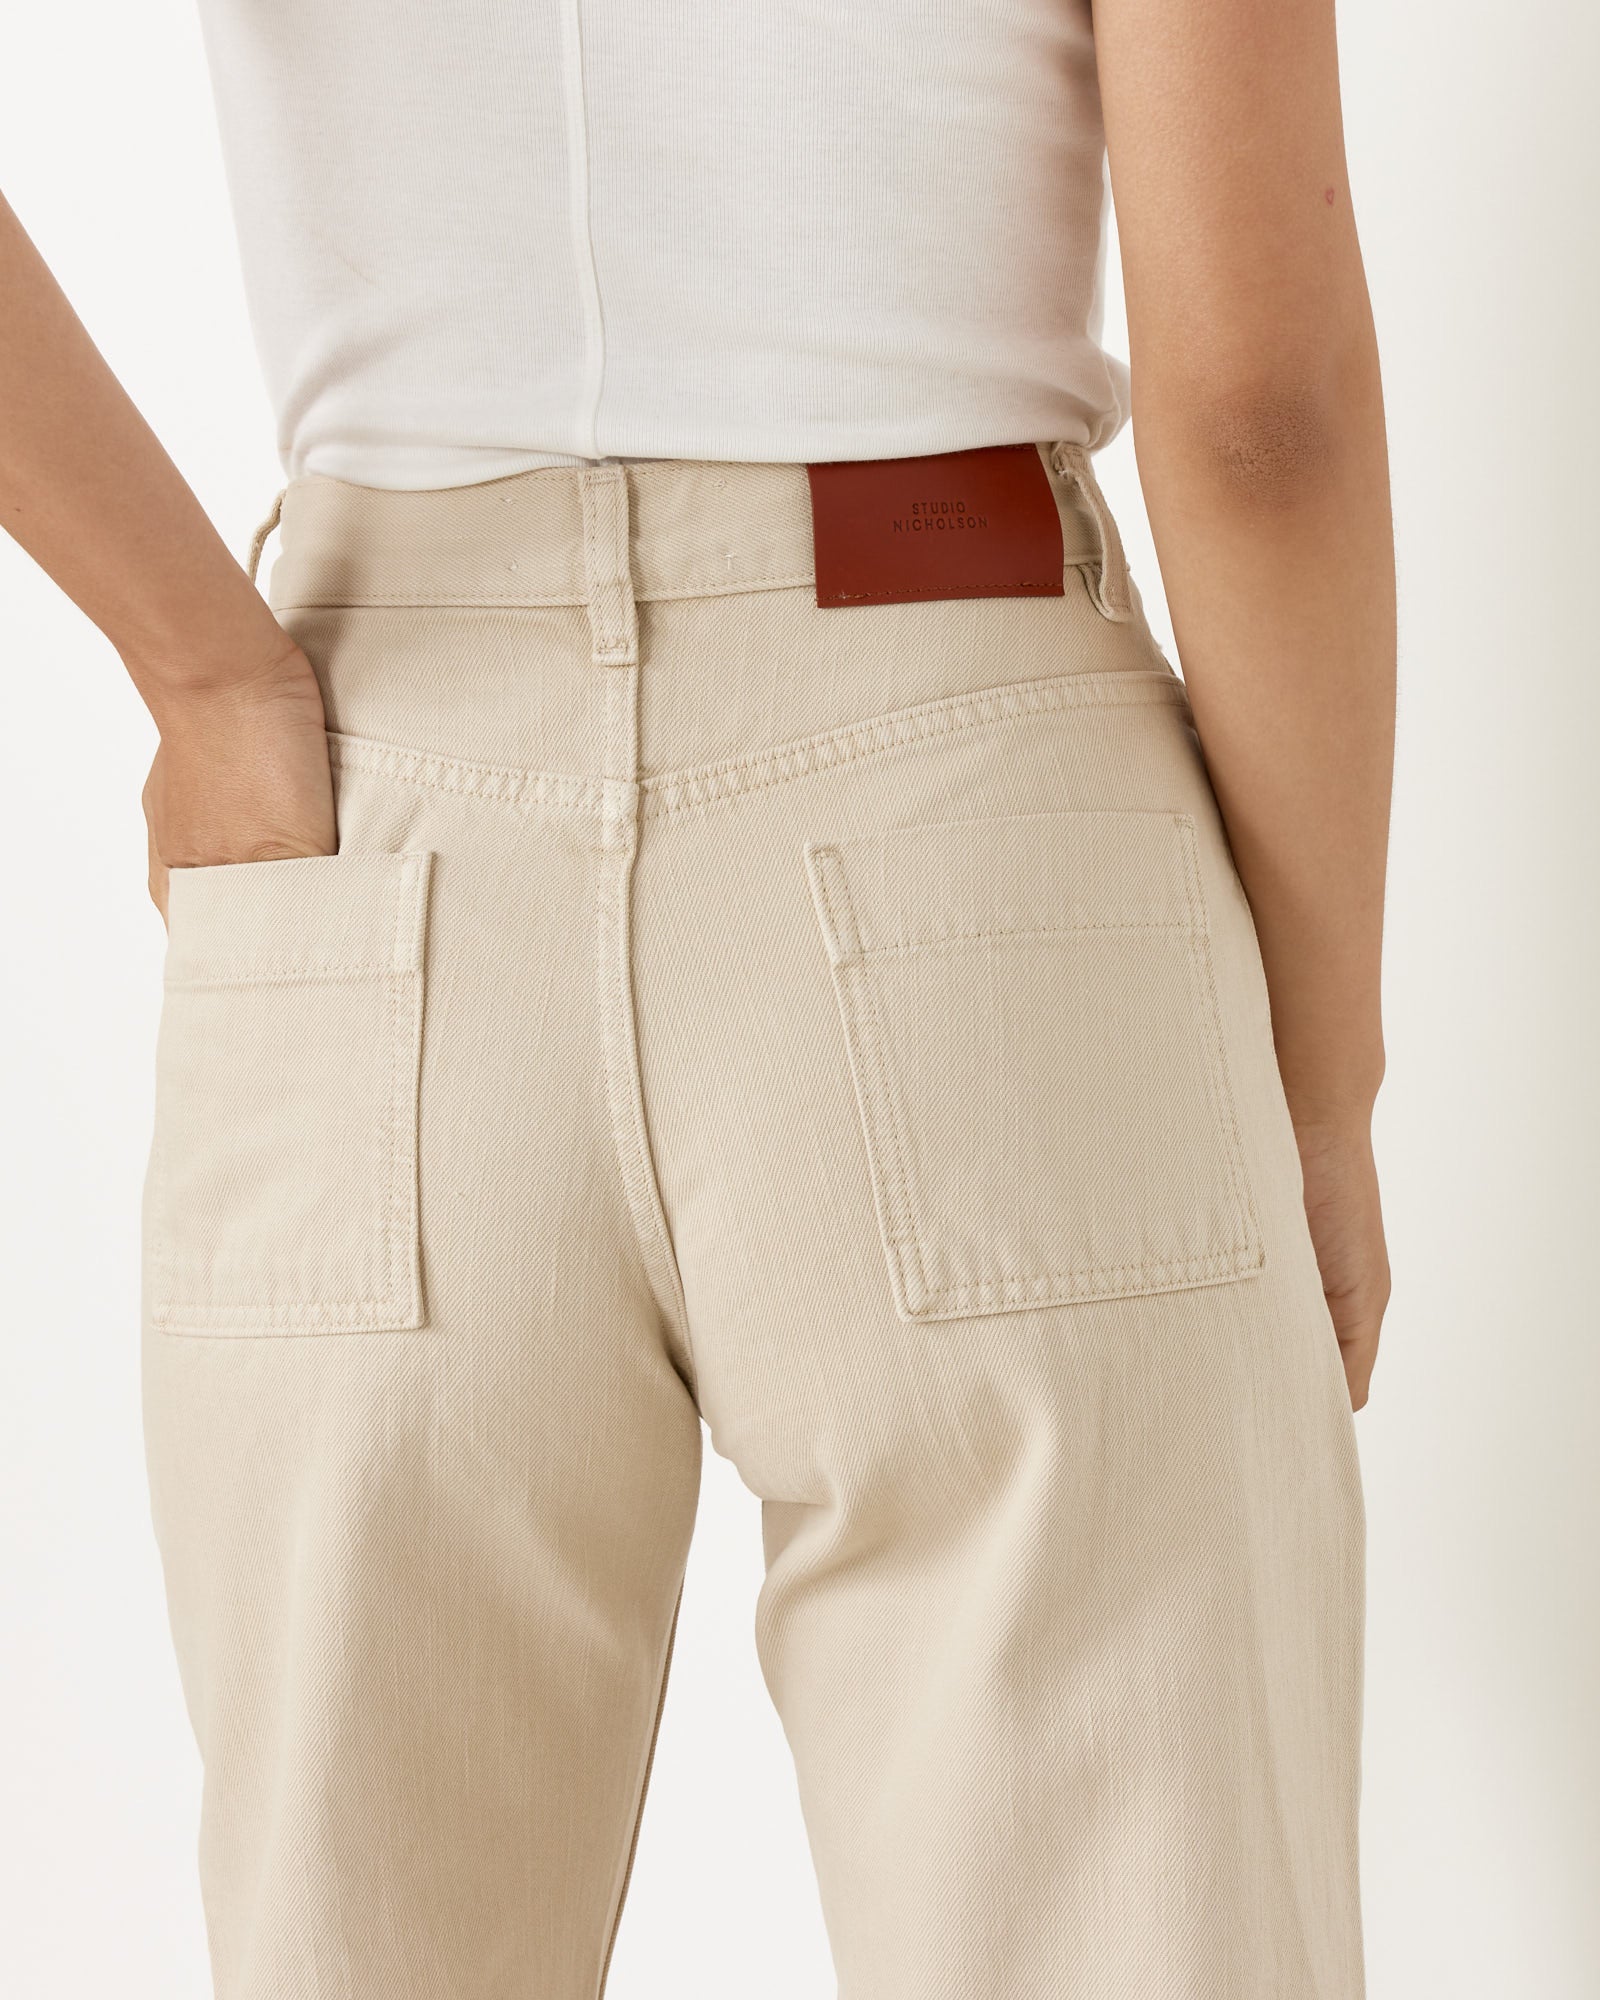 Ruthe Pant in Dove